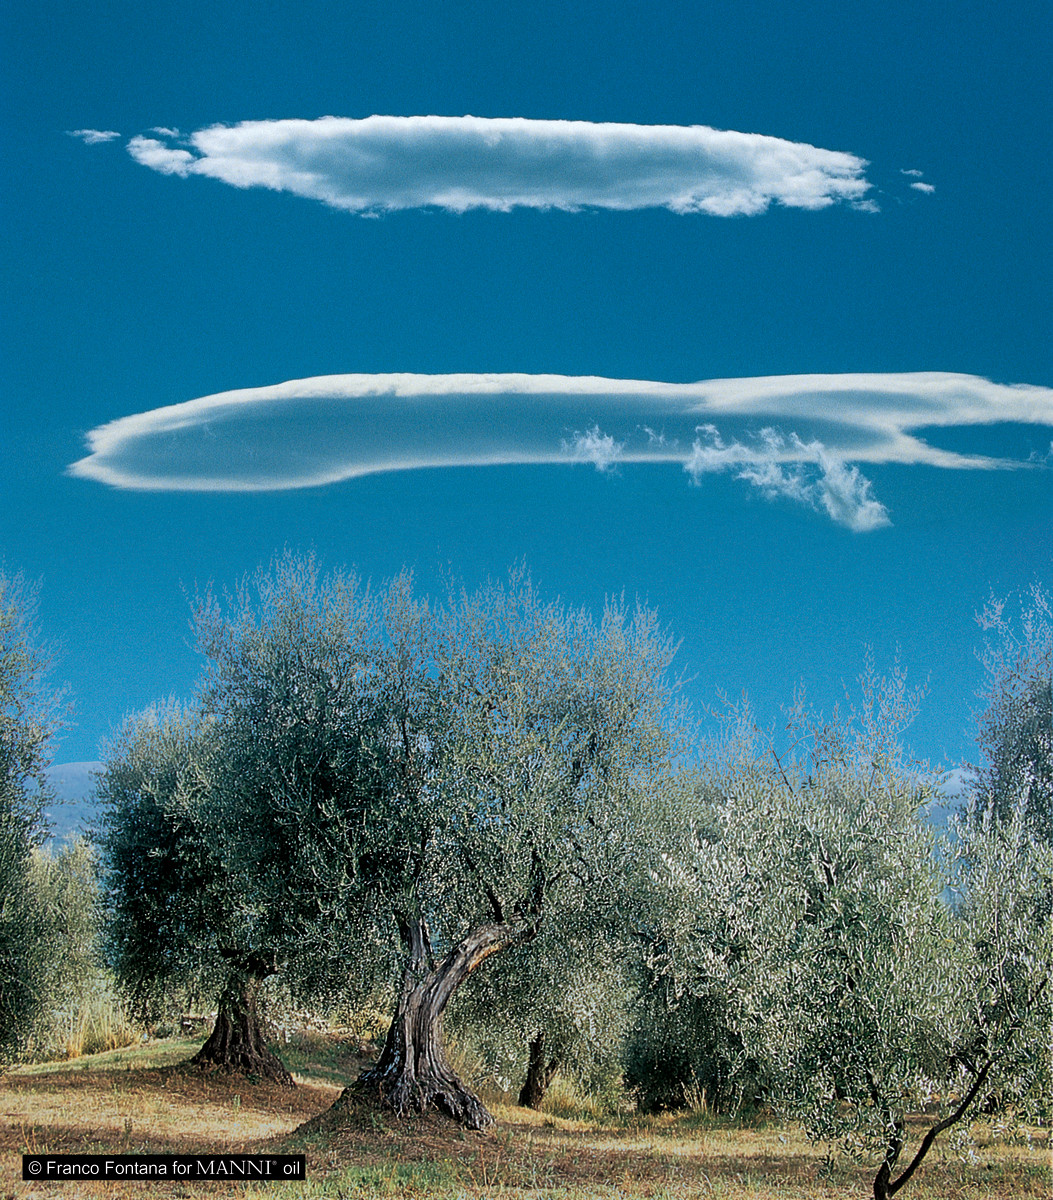 MANNI Extra Virgin Olive Oil tree groves in volcanic soil in Tuscany, Italy.